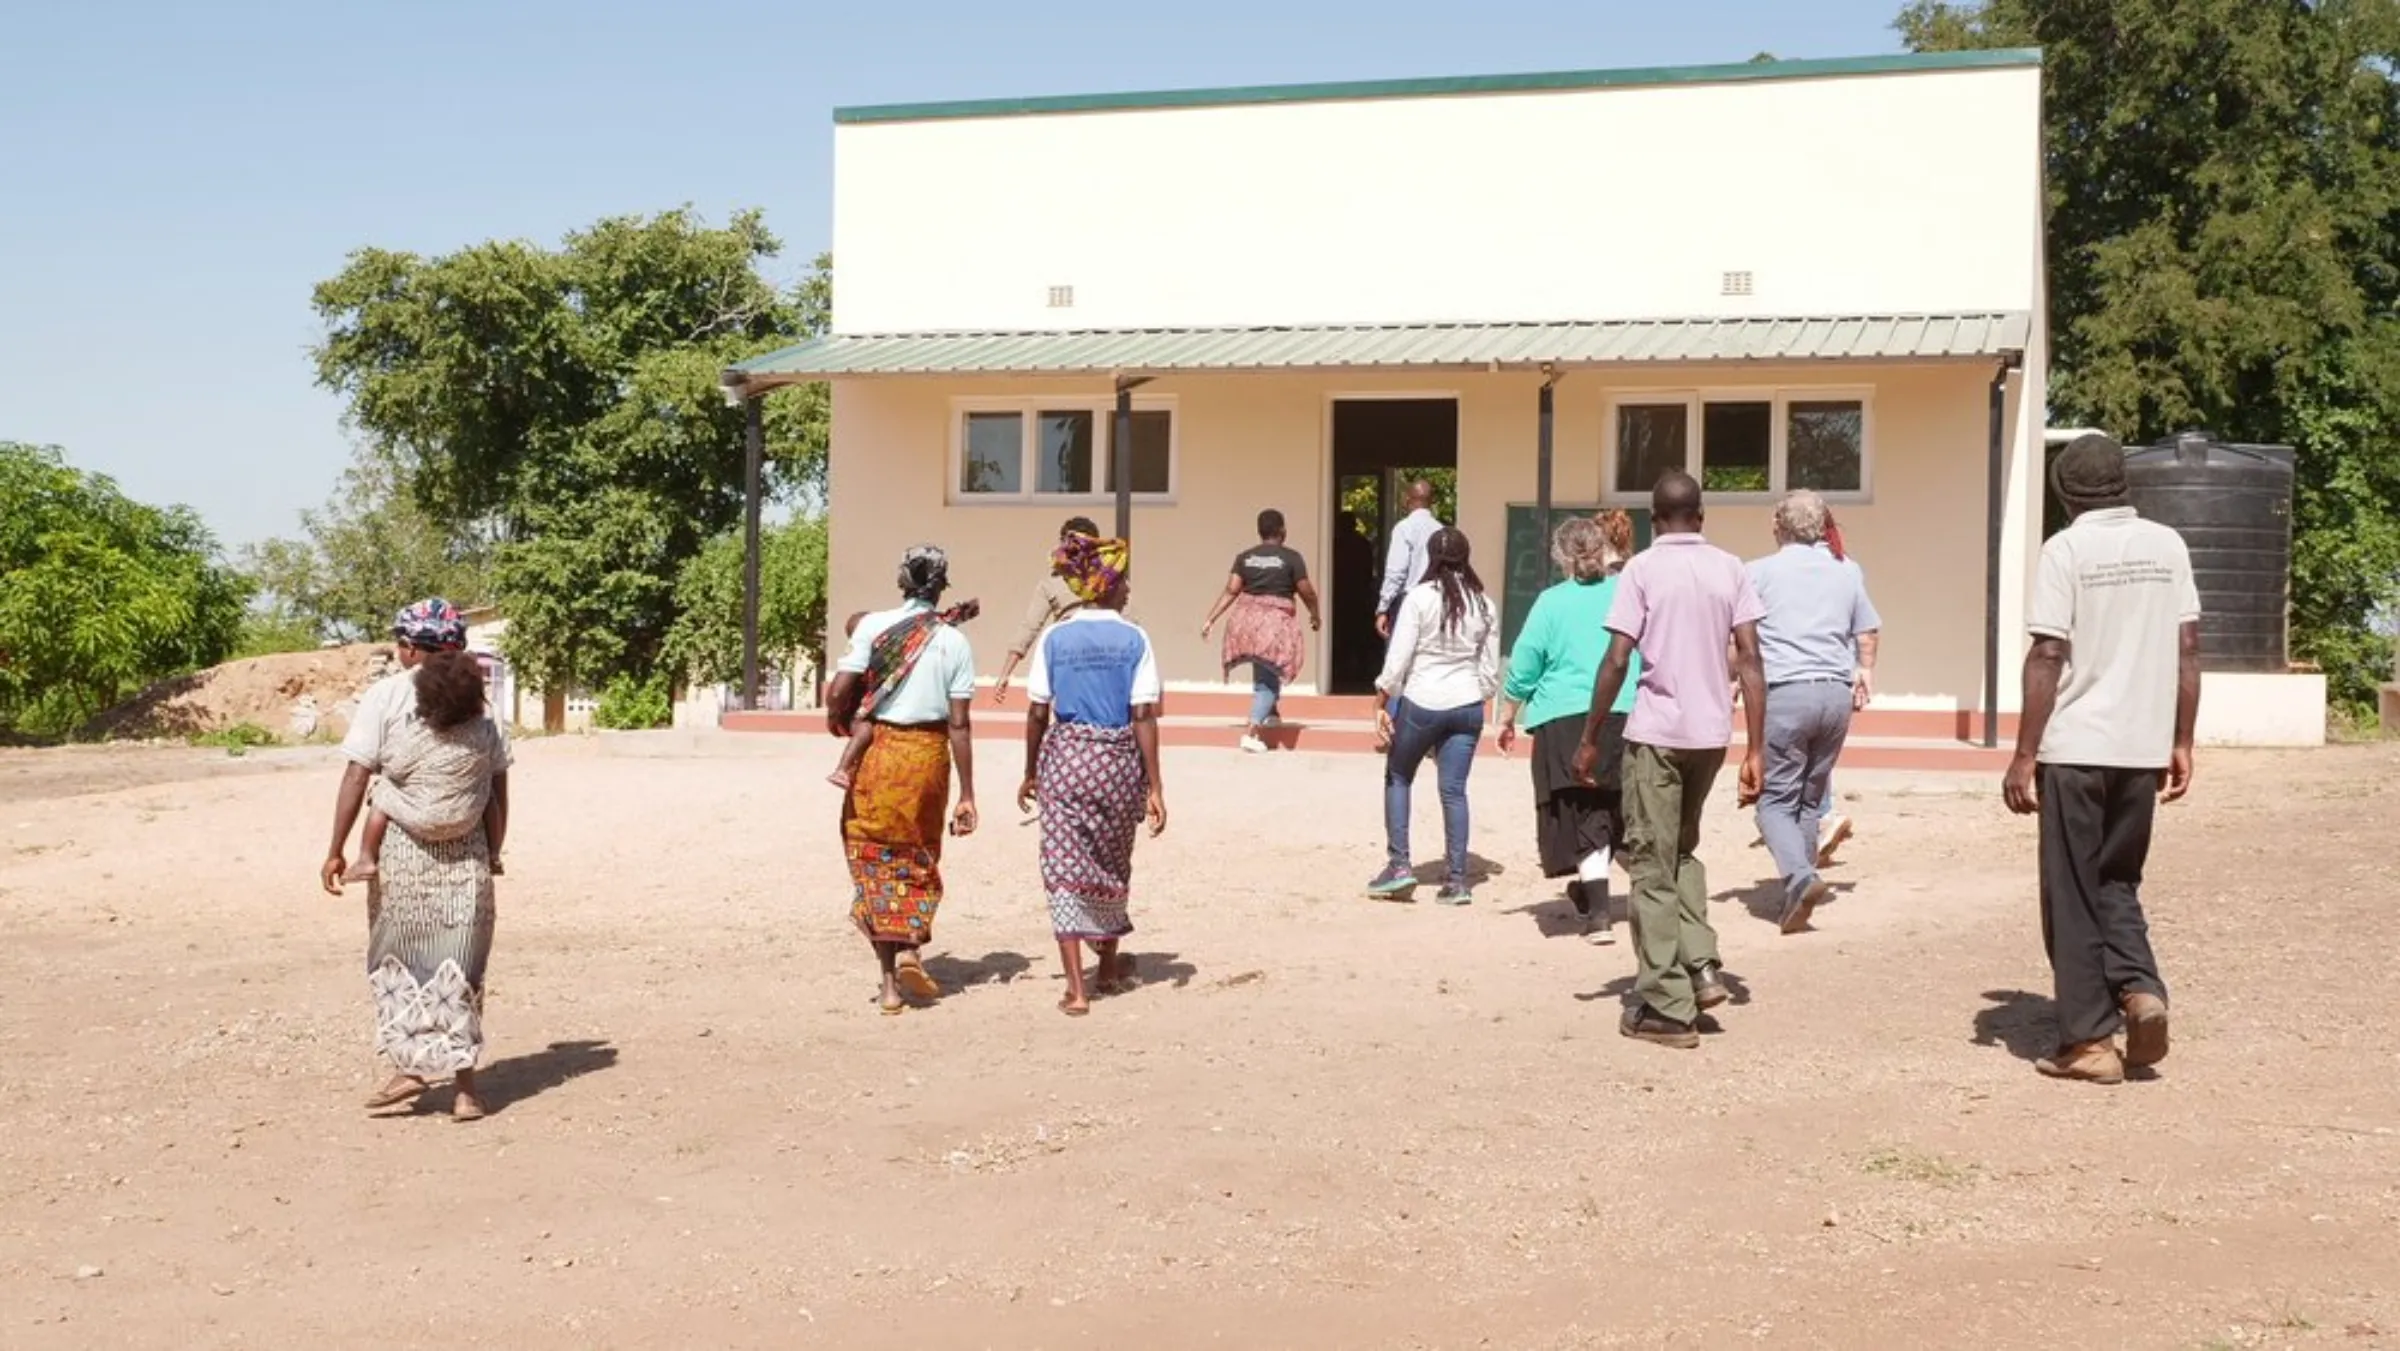 Community members walk towards a school funded by Gorongosa National Park in the reserve’s buffer zone in Mozambique, May 24, 2022